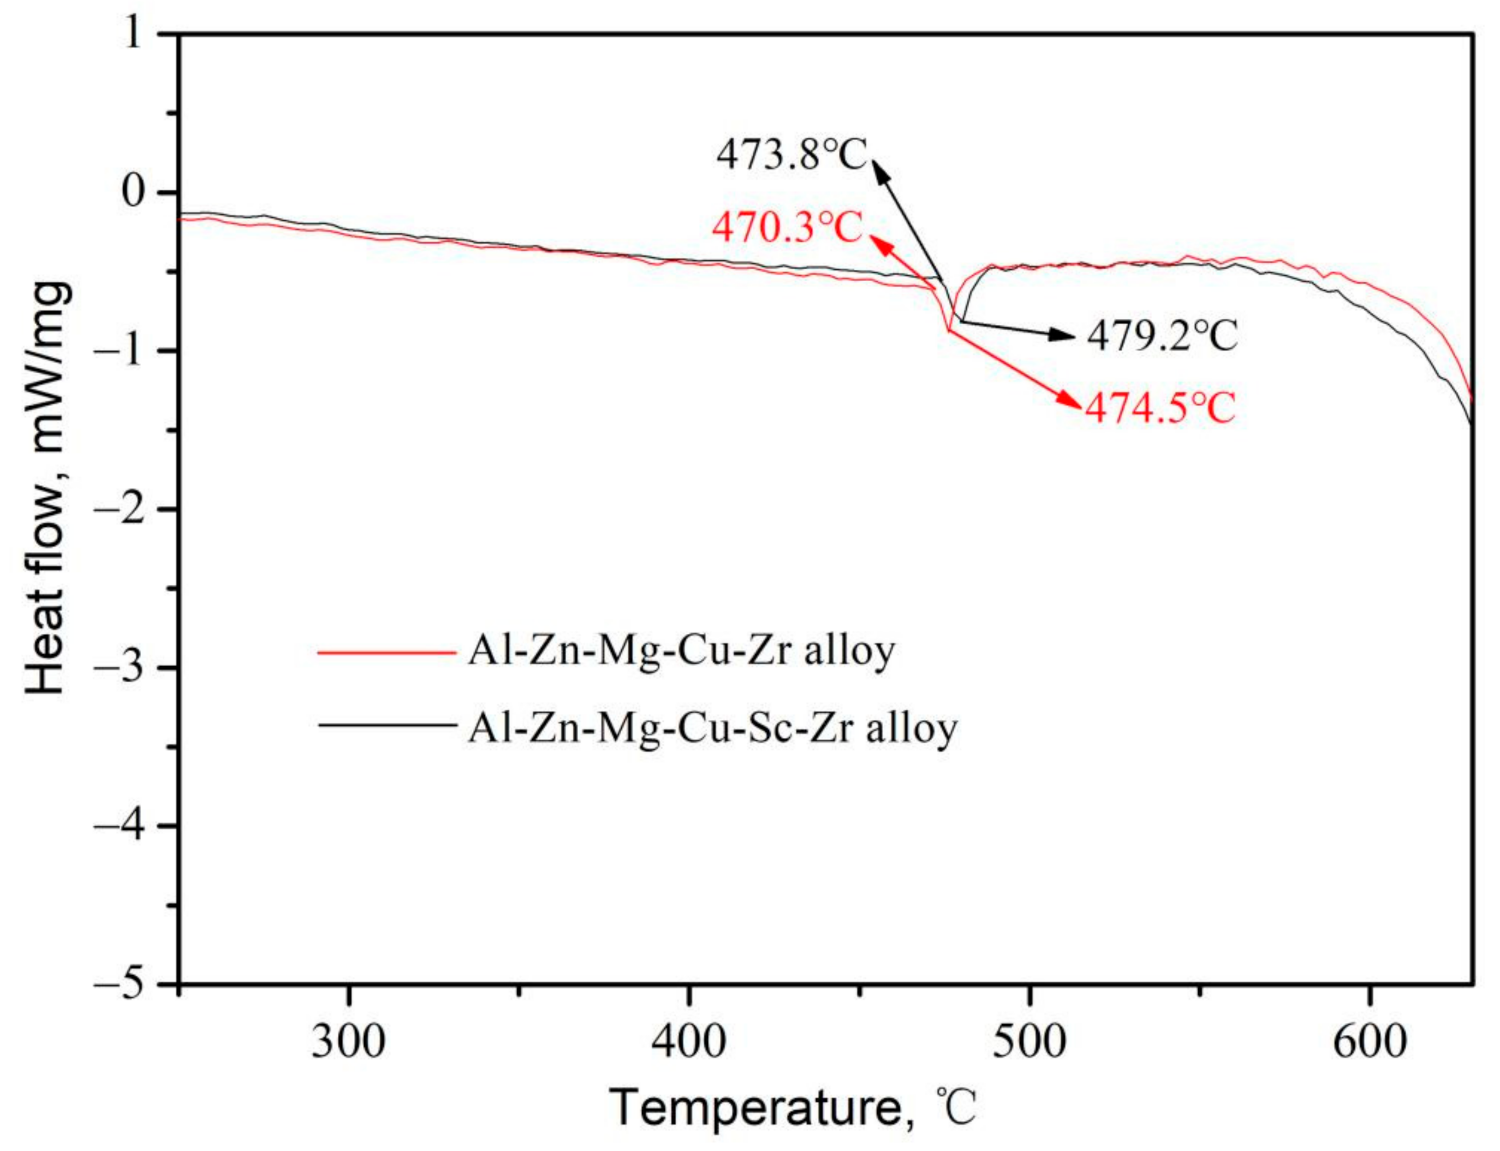 Materials | Free Full-Text | Effect of Sc and Zr Additions on  Recrystallization Behavior and Intergranular Corrosion Resistance of  Al-Zn-Mg-Cu Alloys